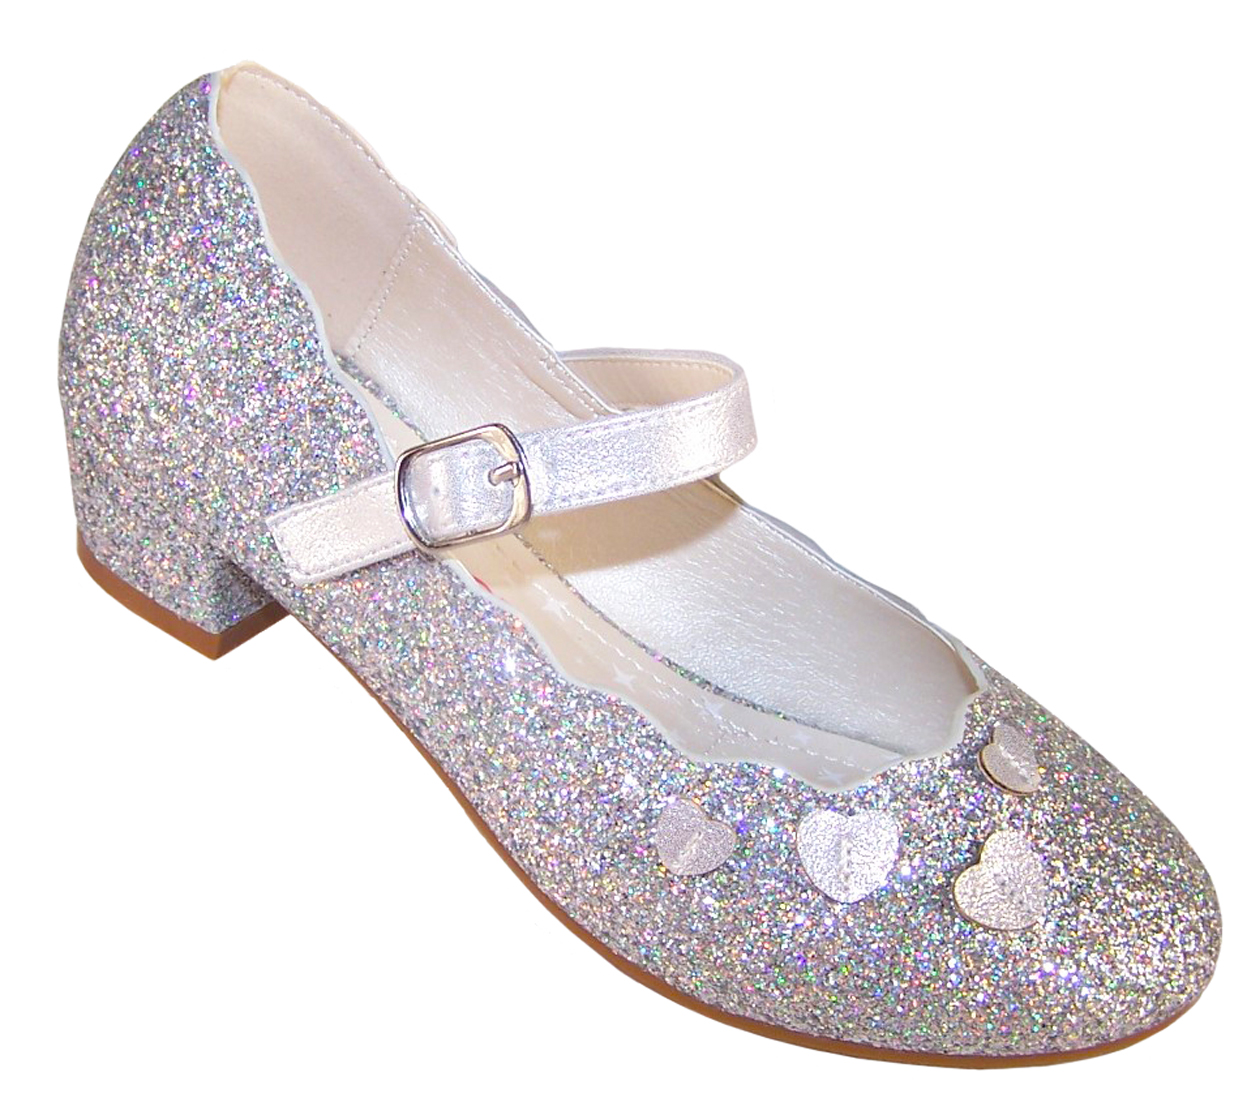 Girls silver sparkly heeled party shoes-0